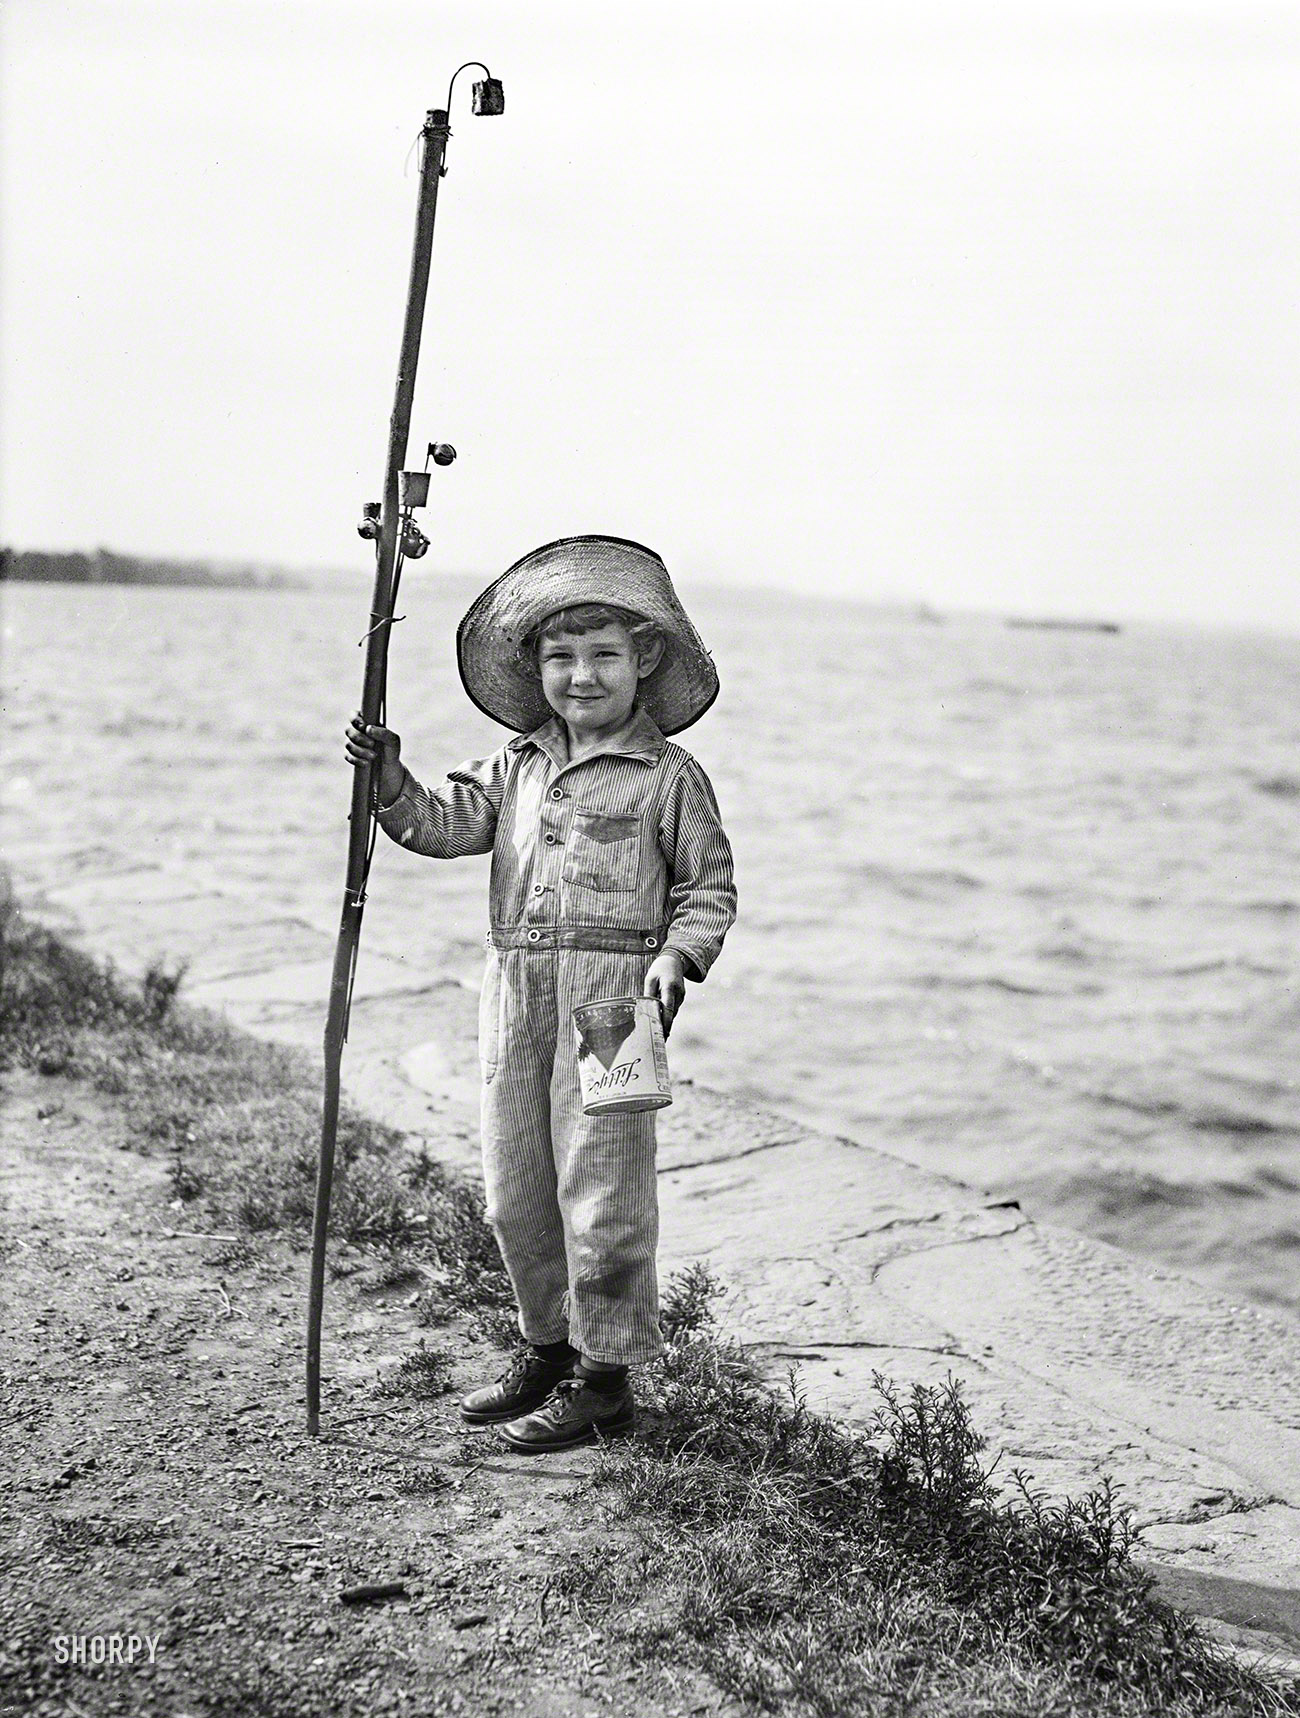 June 1929. "Young boy with bucket and pole on the Potomac." We hope you have a license to operate that thing. Harris & Ewing glass negative. View full size.